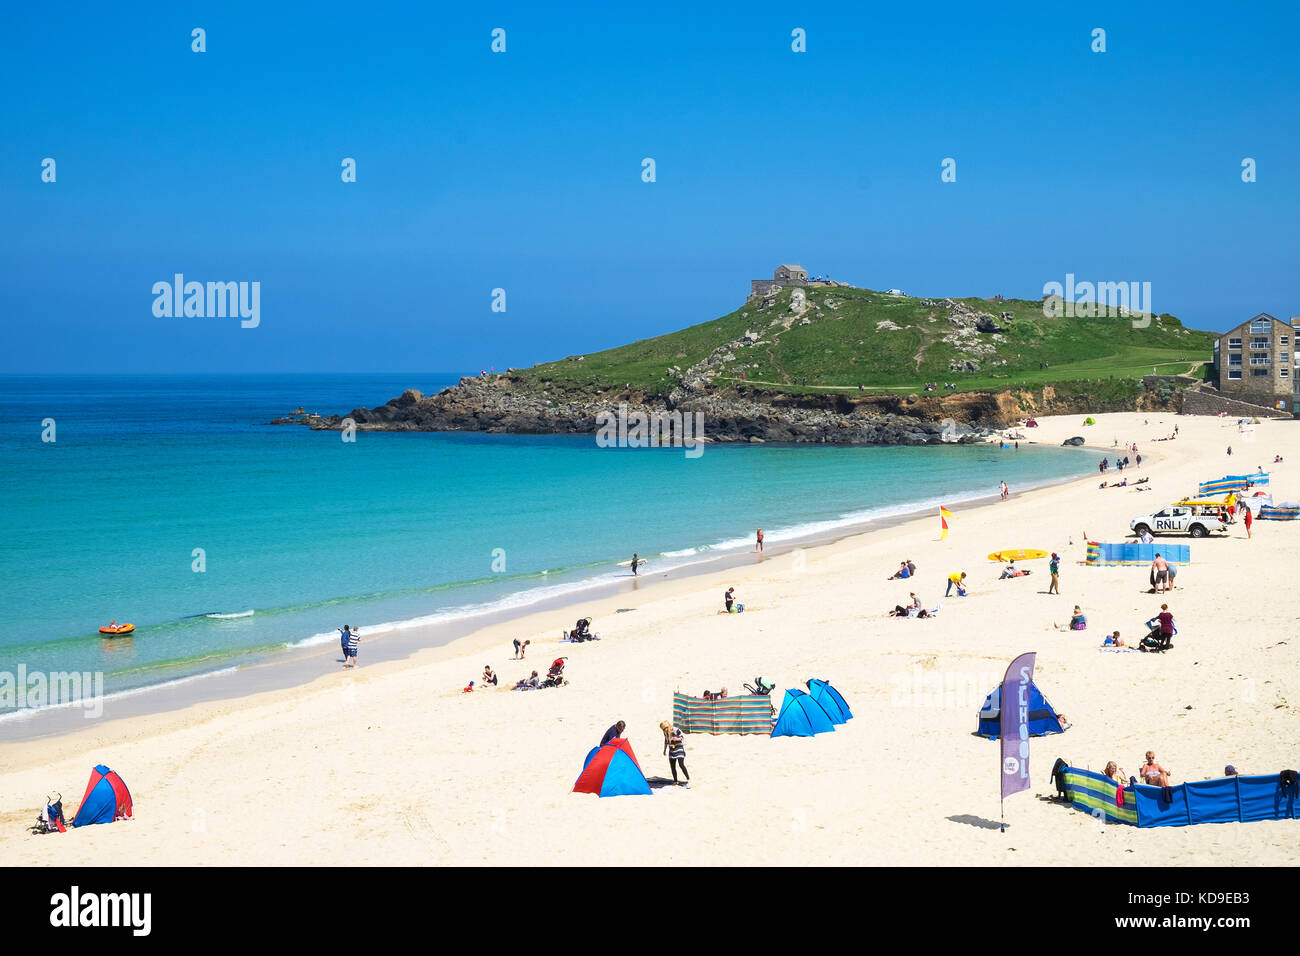 sunny day at porthmeor beach in st.ives, cornwall, england, britain, uk. Stock Photo